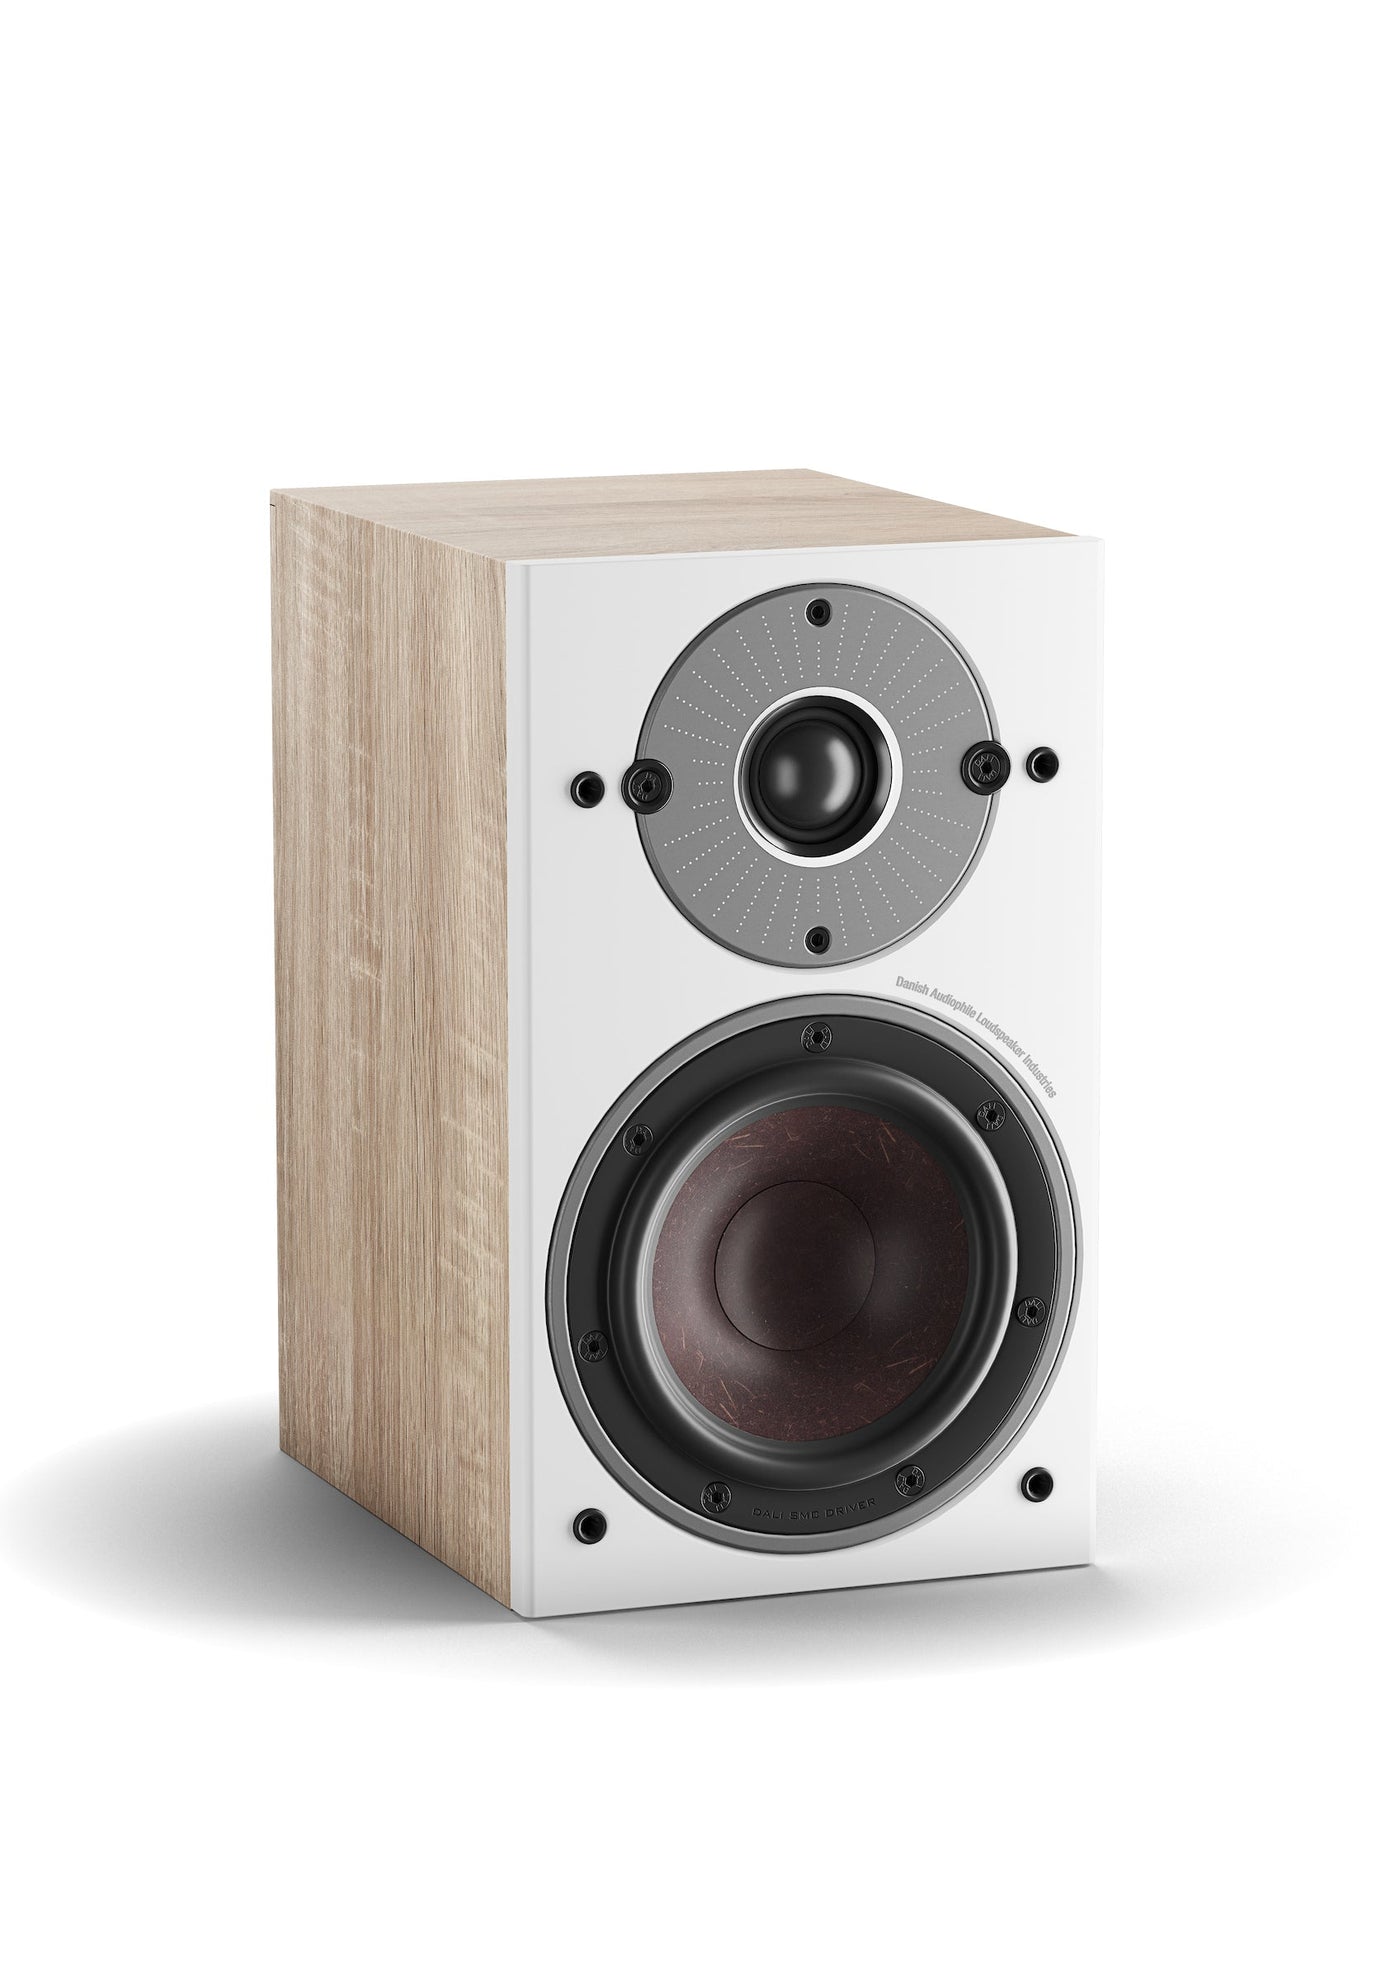 The Dali Oberon 1 C loudspeakers are a fantastic bookshelf speaker intended for smaller rooms where space is more modest.